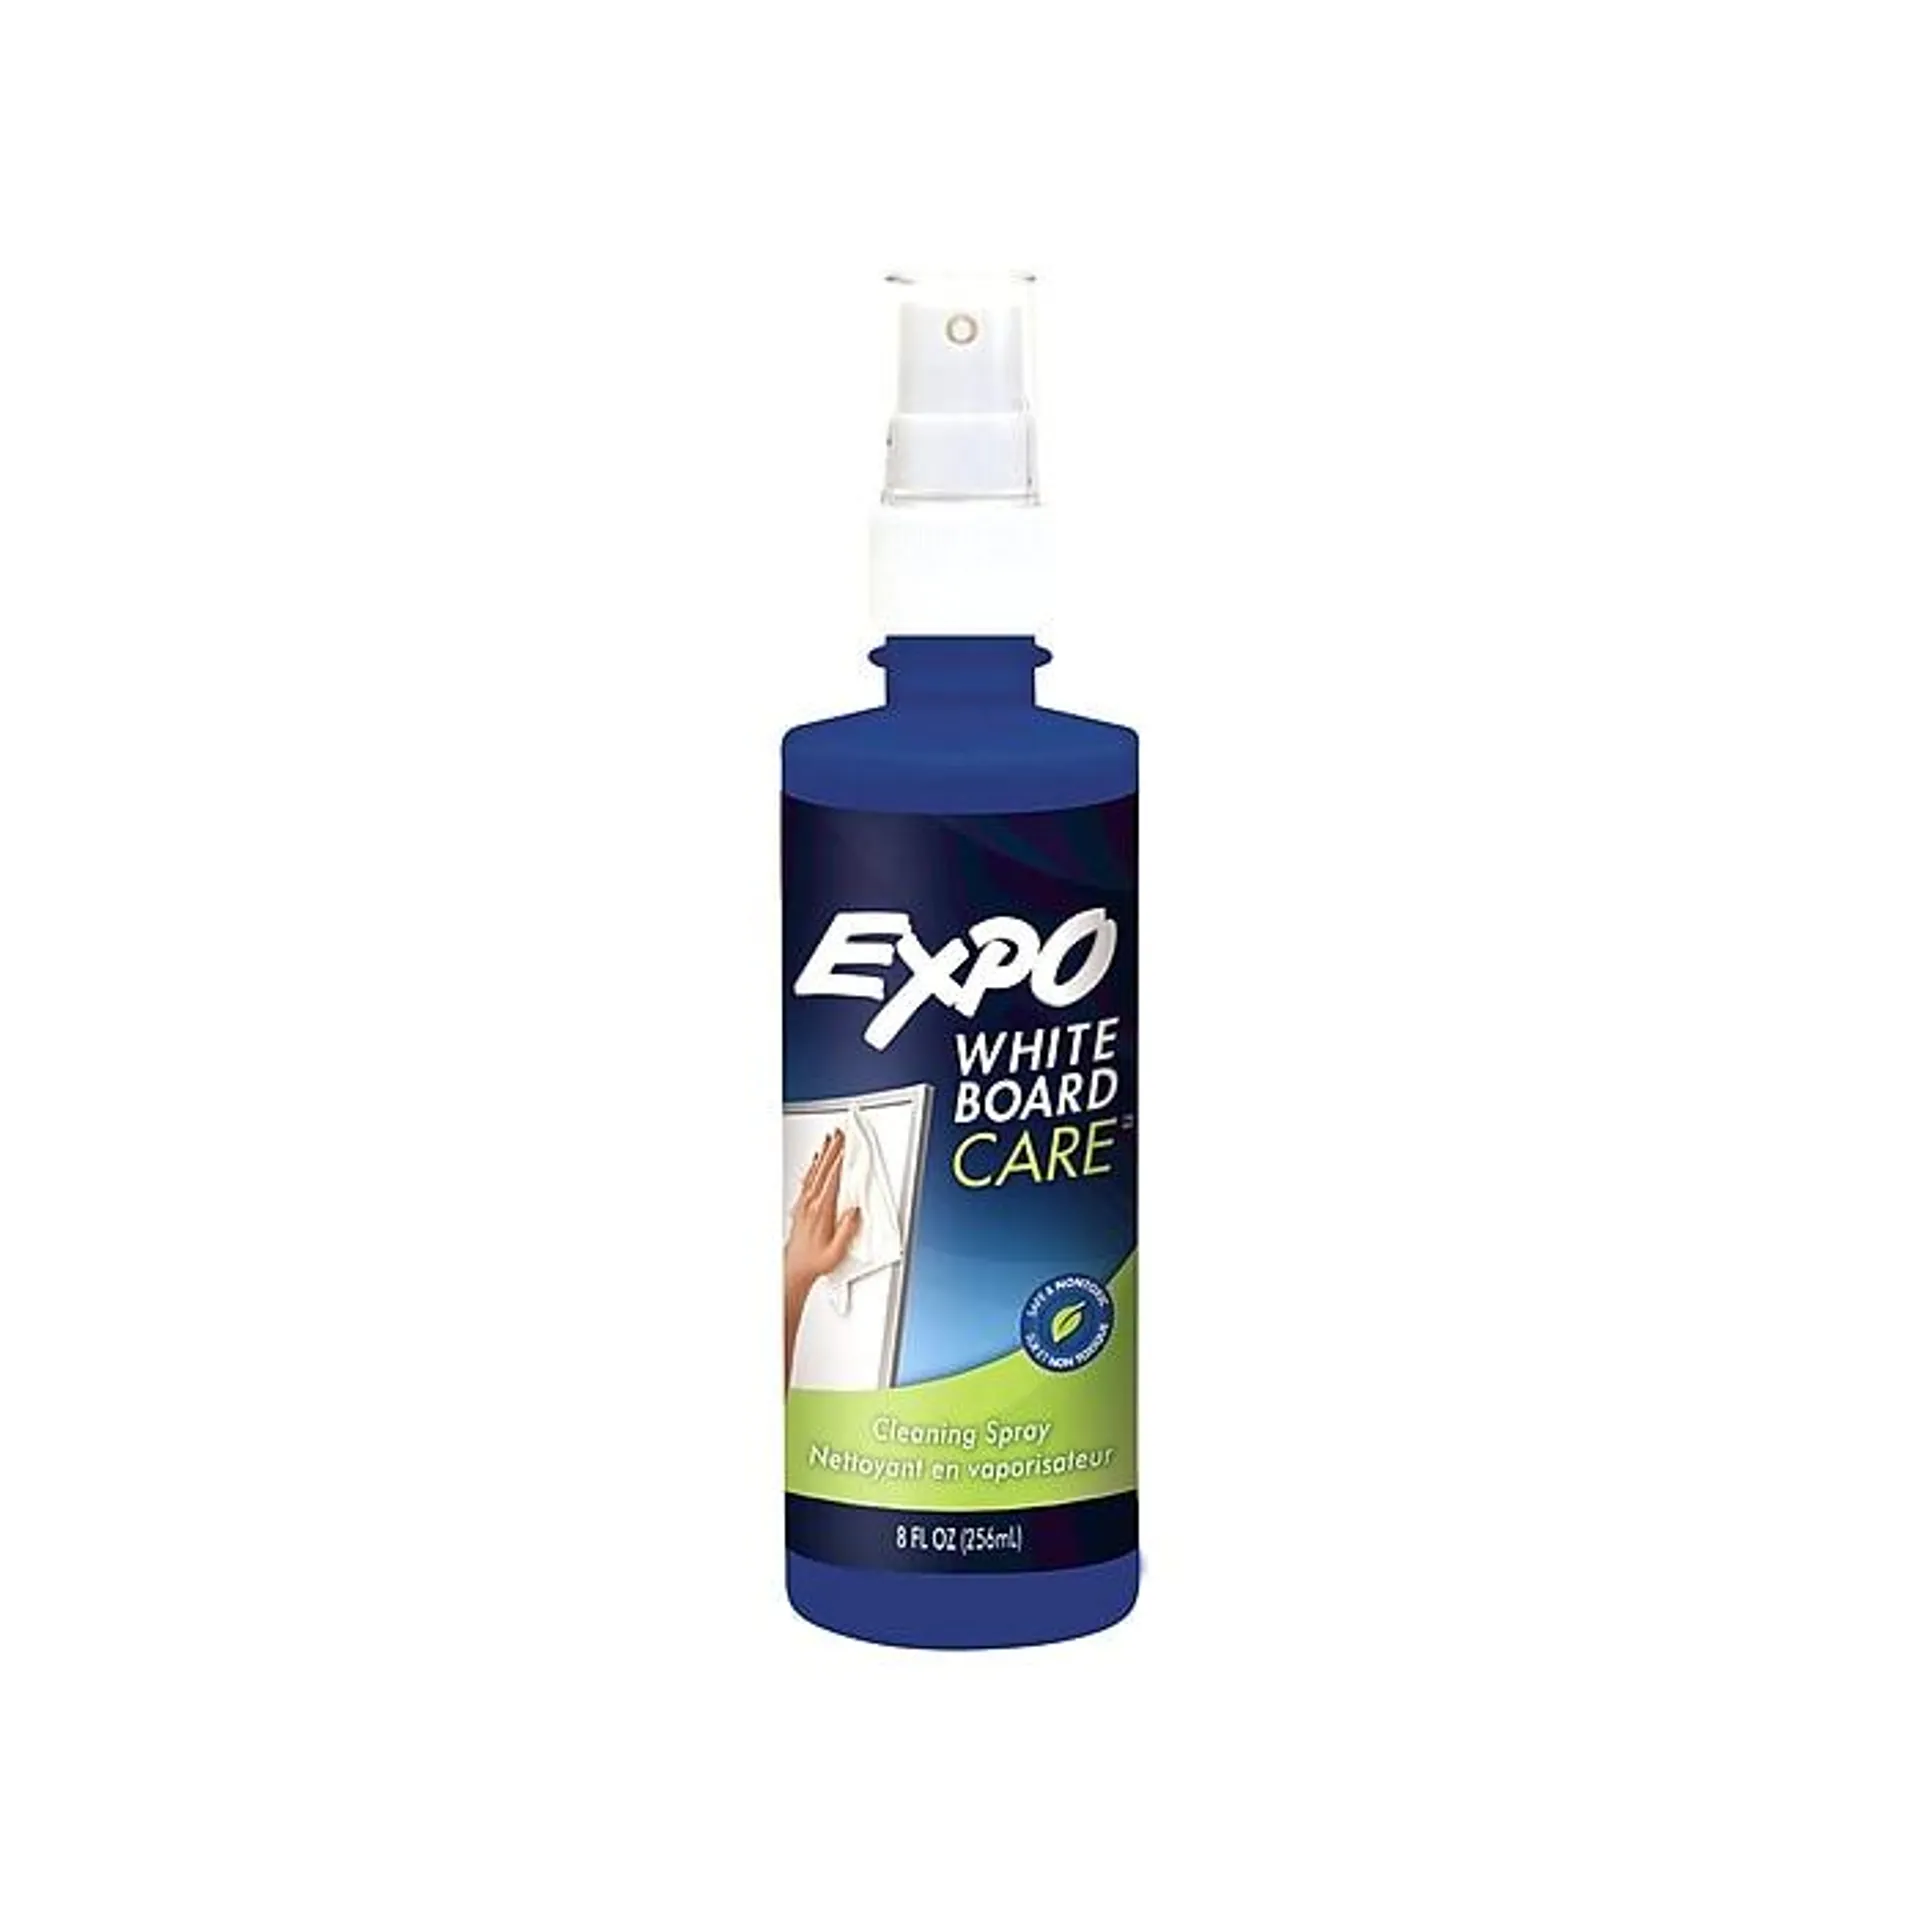 Expo Whiteboard Care Dry Erase Cleaner,